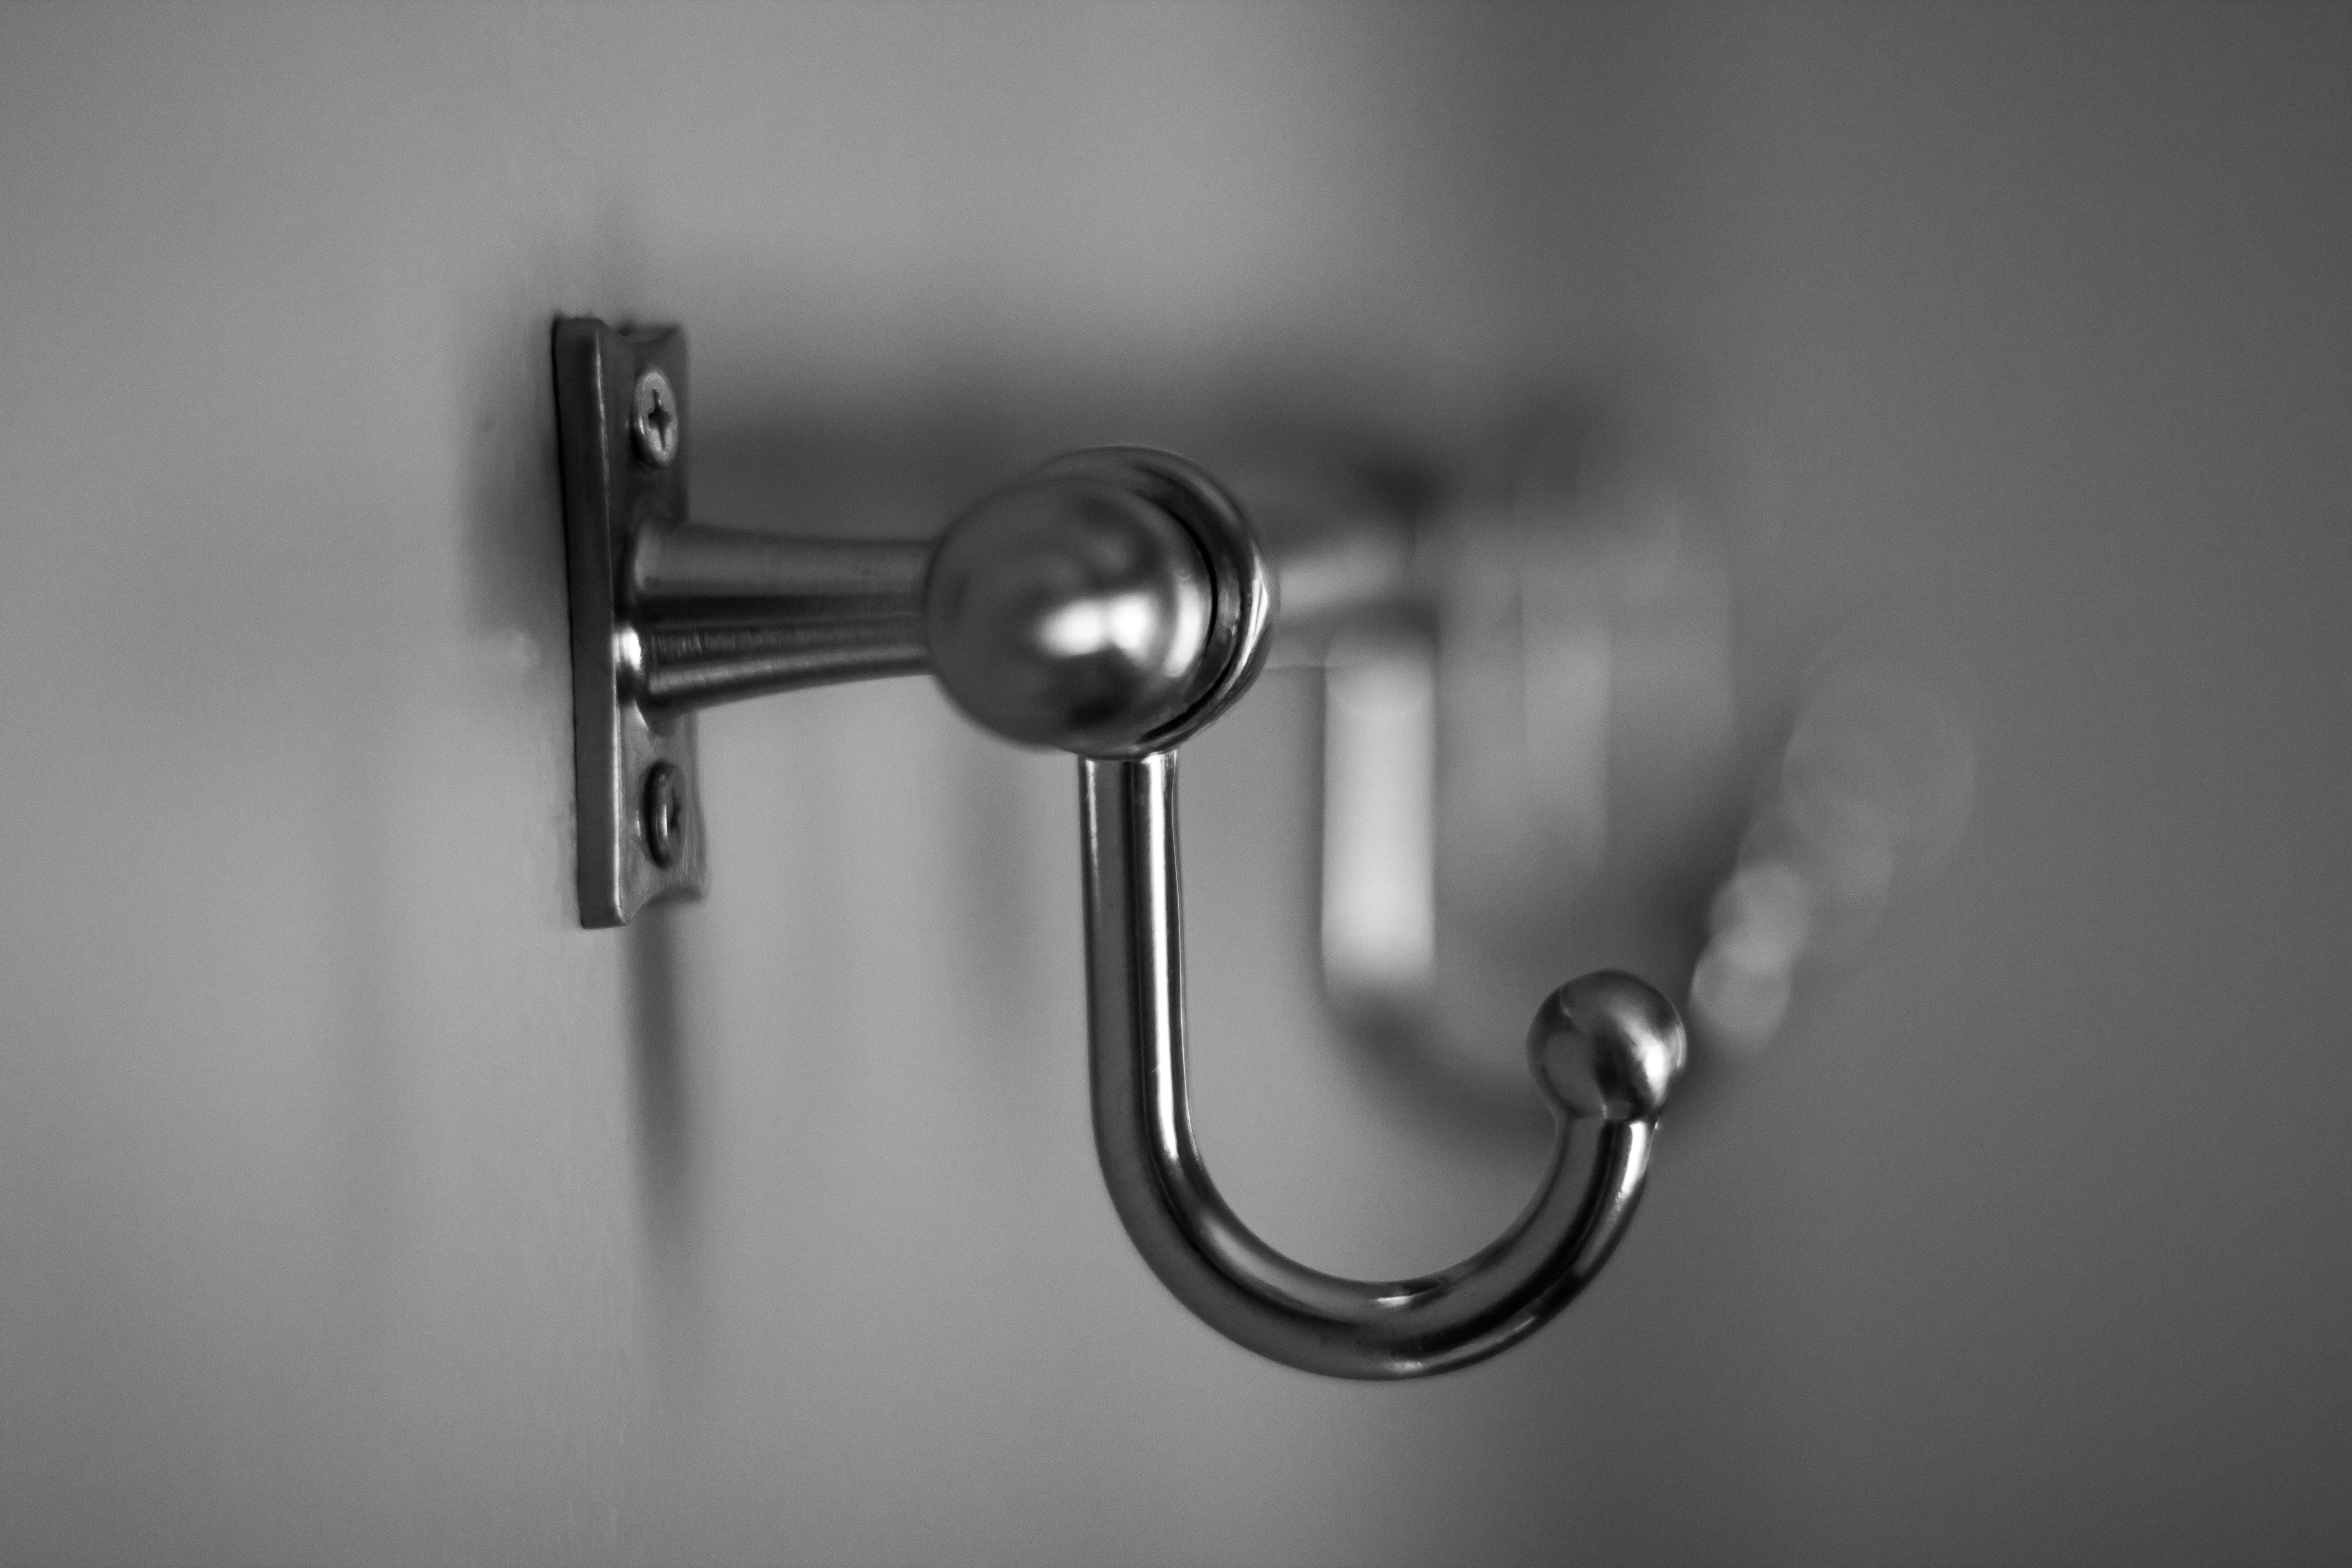 Photo by Steve Johnson: https://www.pexels.com/photo/selective-focus-of-stainless-steel-hook-1256916/